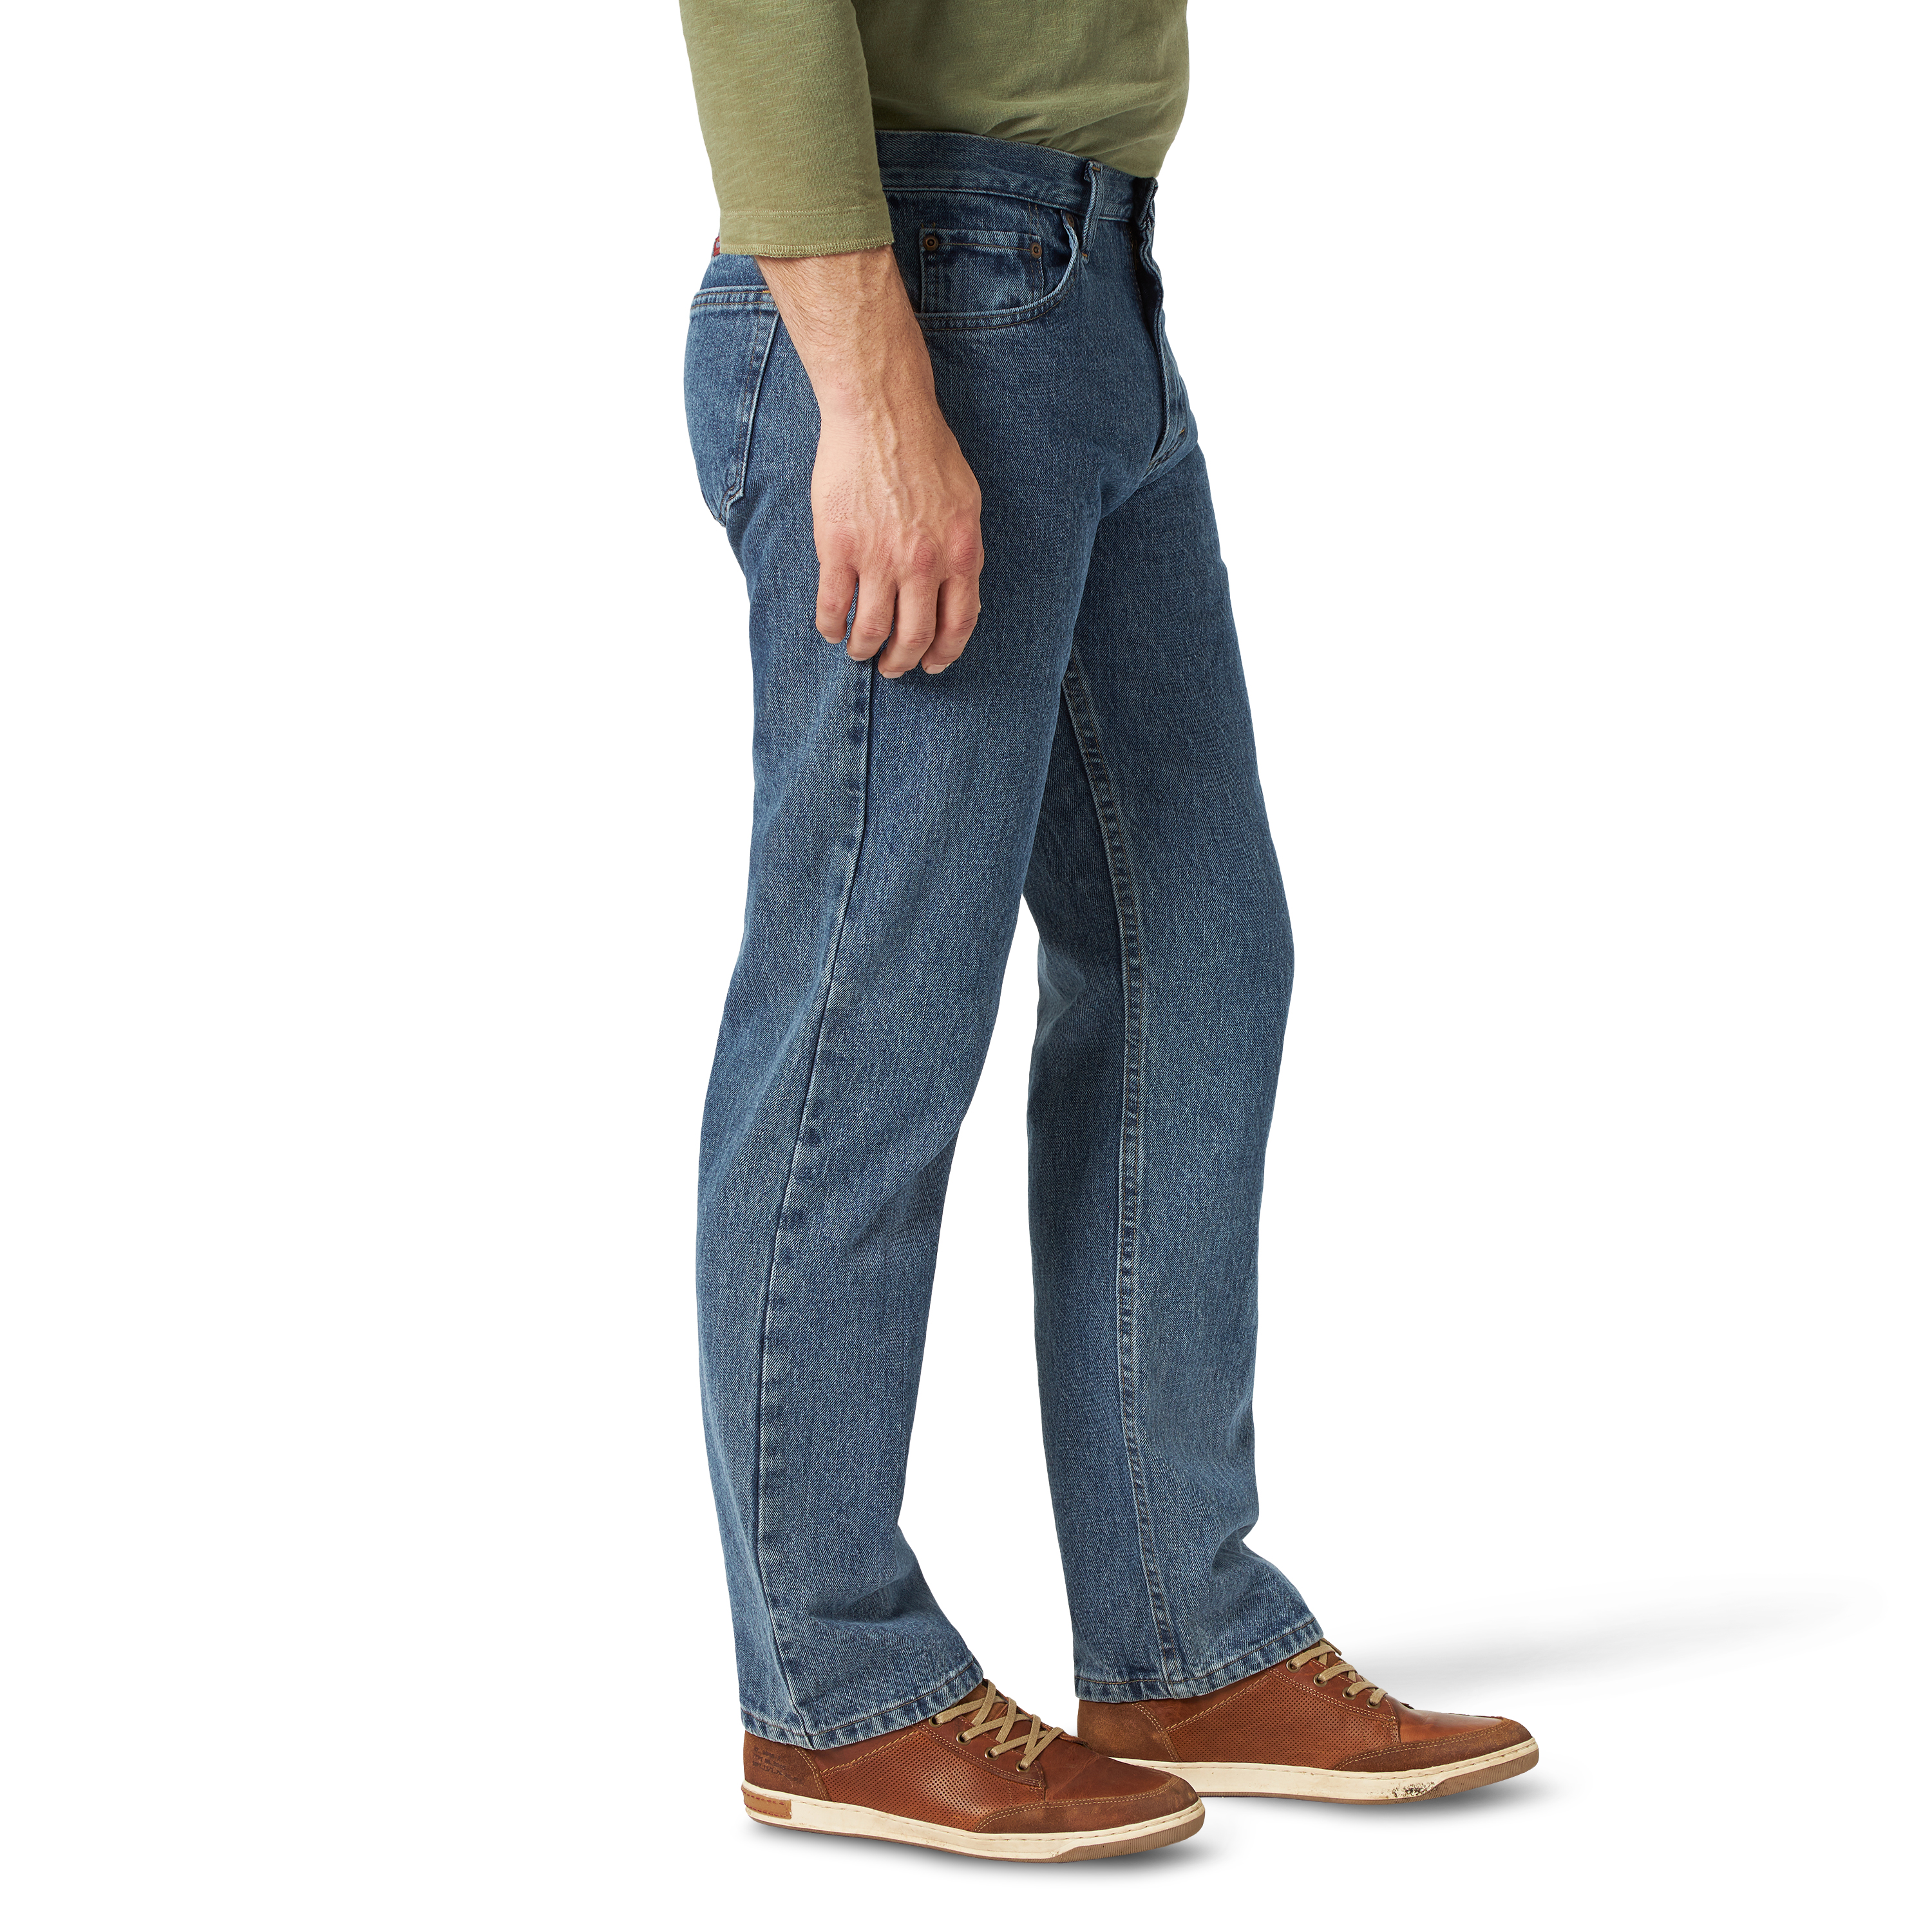 Wrangler Men's and Big Men's Relaxed Fit Jeans - image 4 of 5